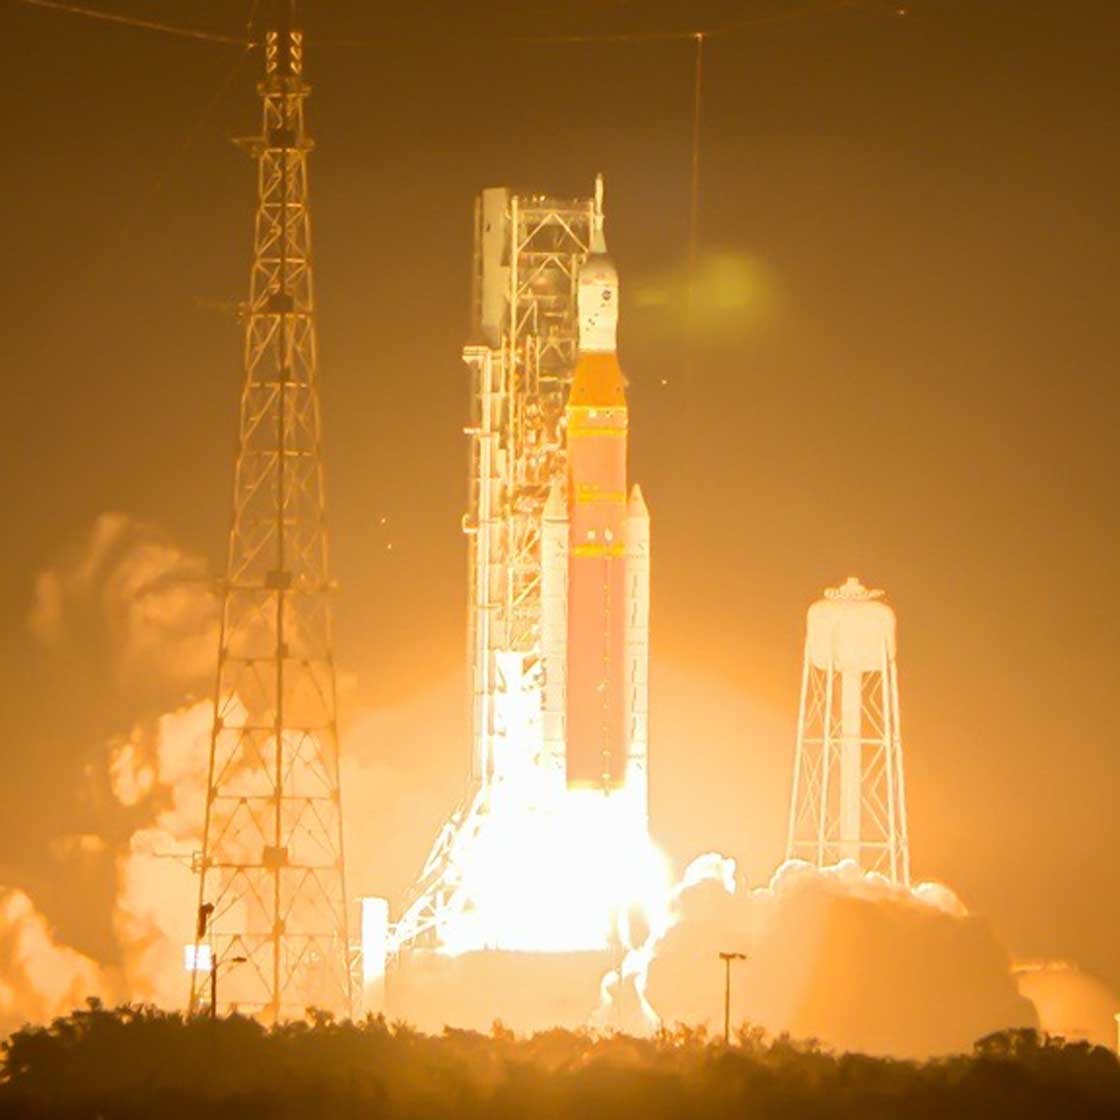 NASA's Artemis I launch echoes the earlier Apollo missions to the Moon